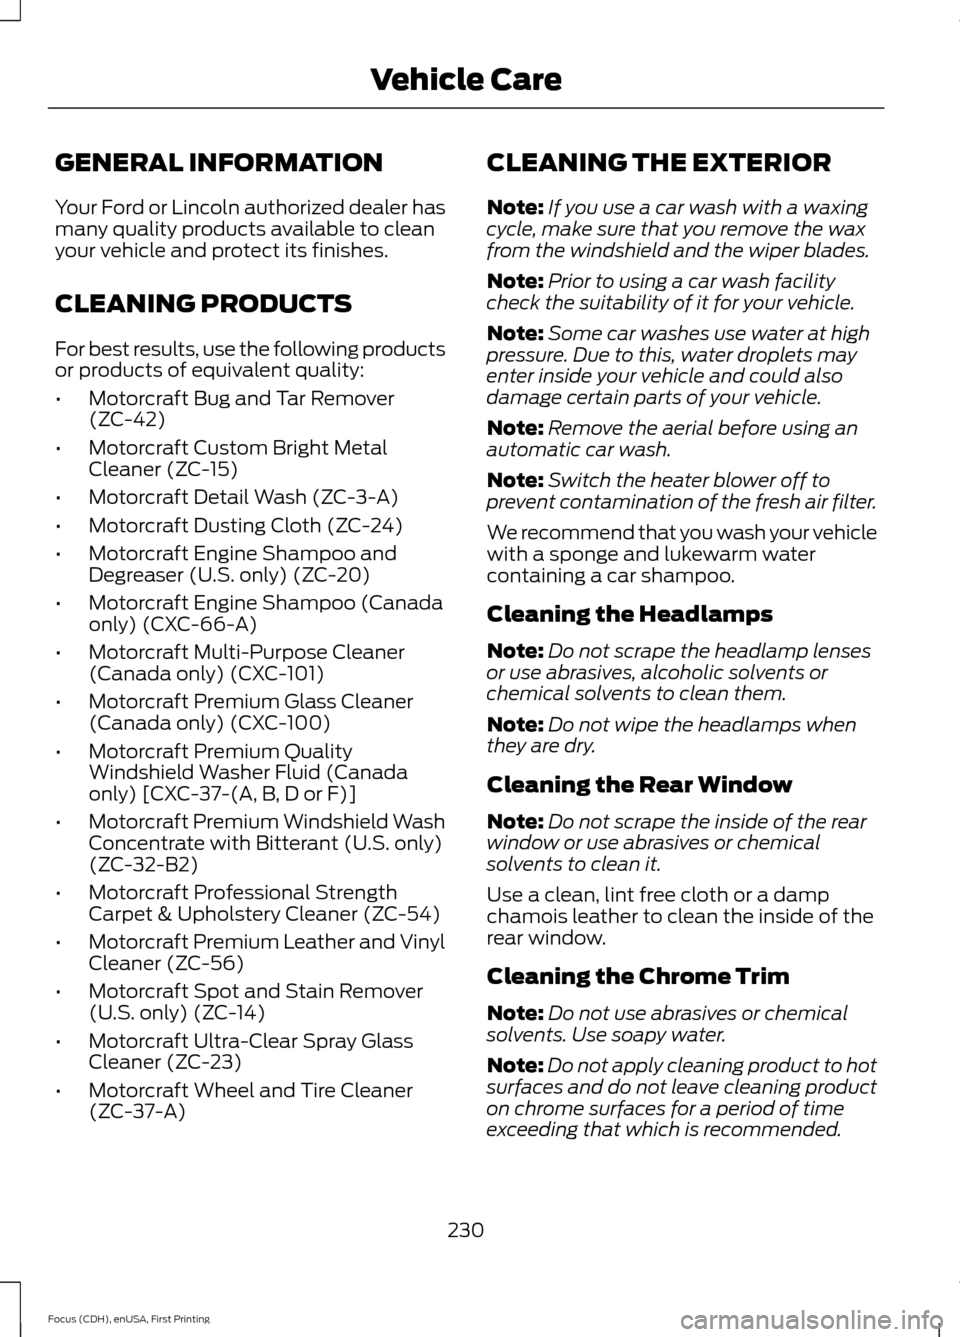 FORD FOCUS 2015 3.G Owners Manual GENERAL INFORMATION
Your Ford or Lincoln authorized dealer has
many quality products available to clean
your vehicle and protect its finishes.
CLEANING PRODUCTS
For best results, use the following pro